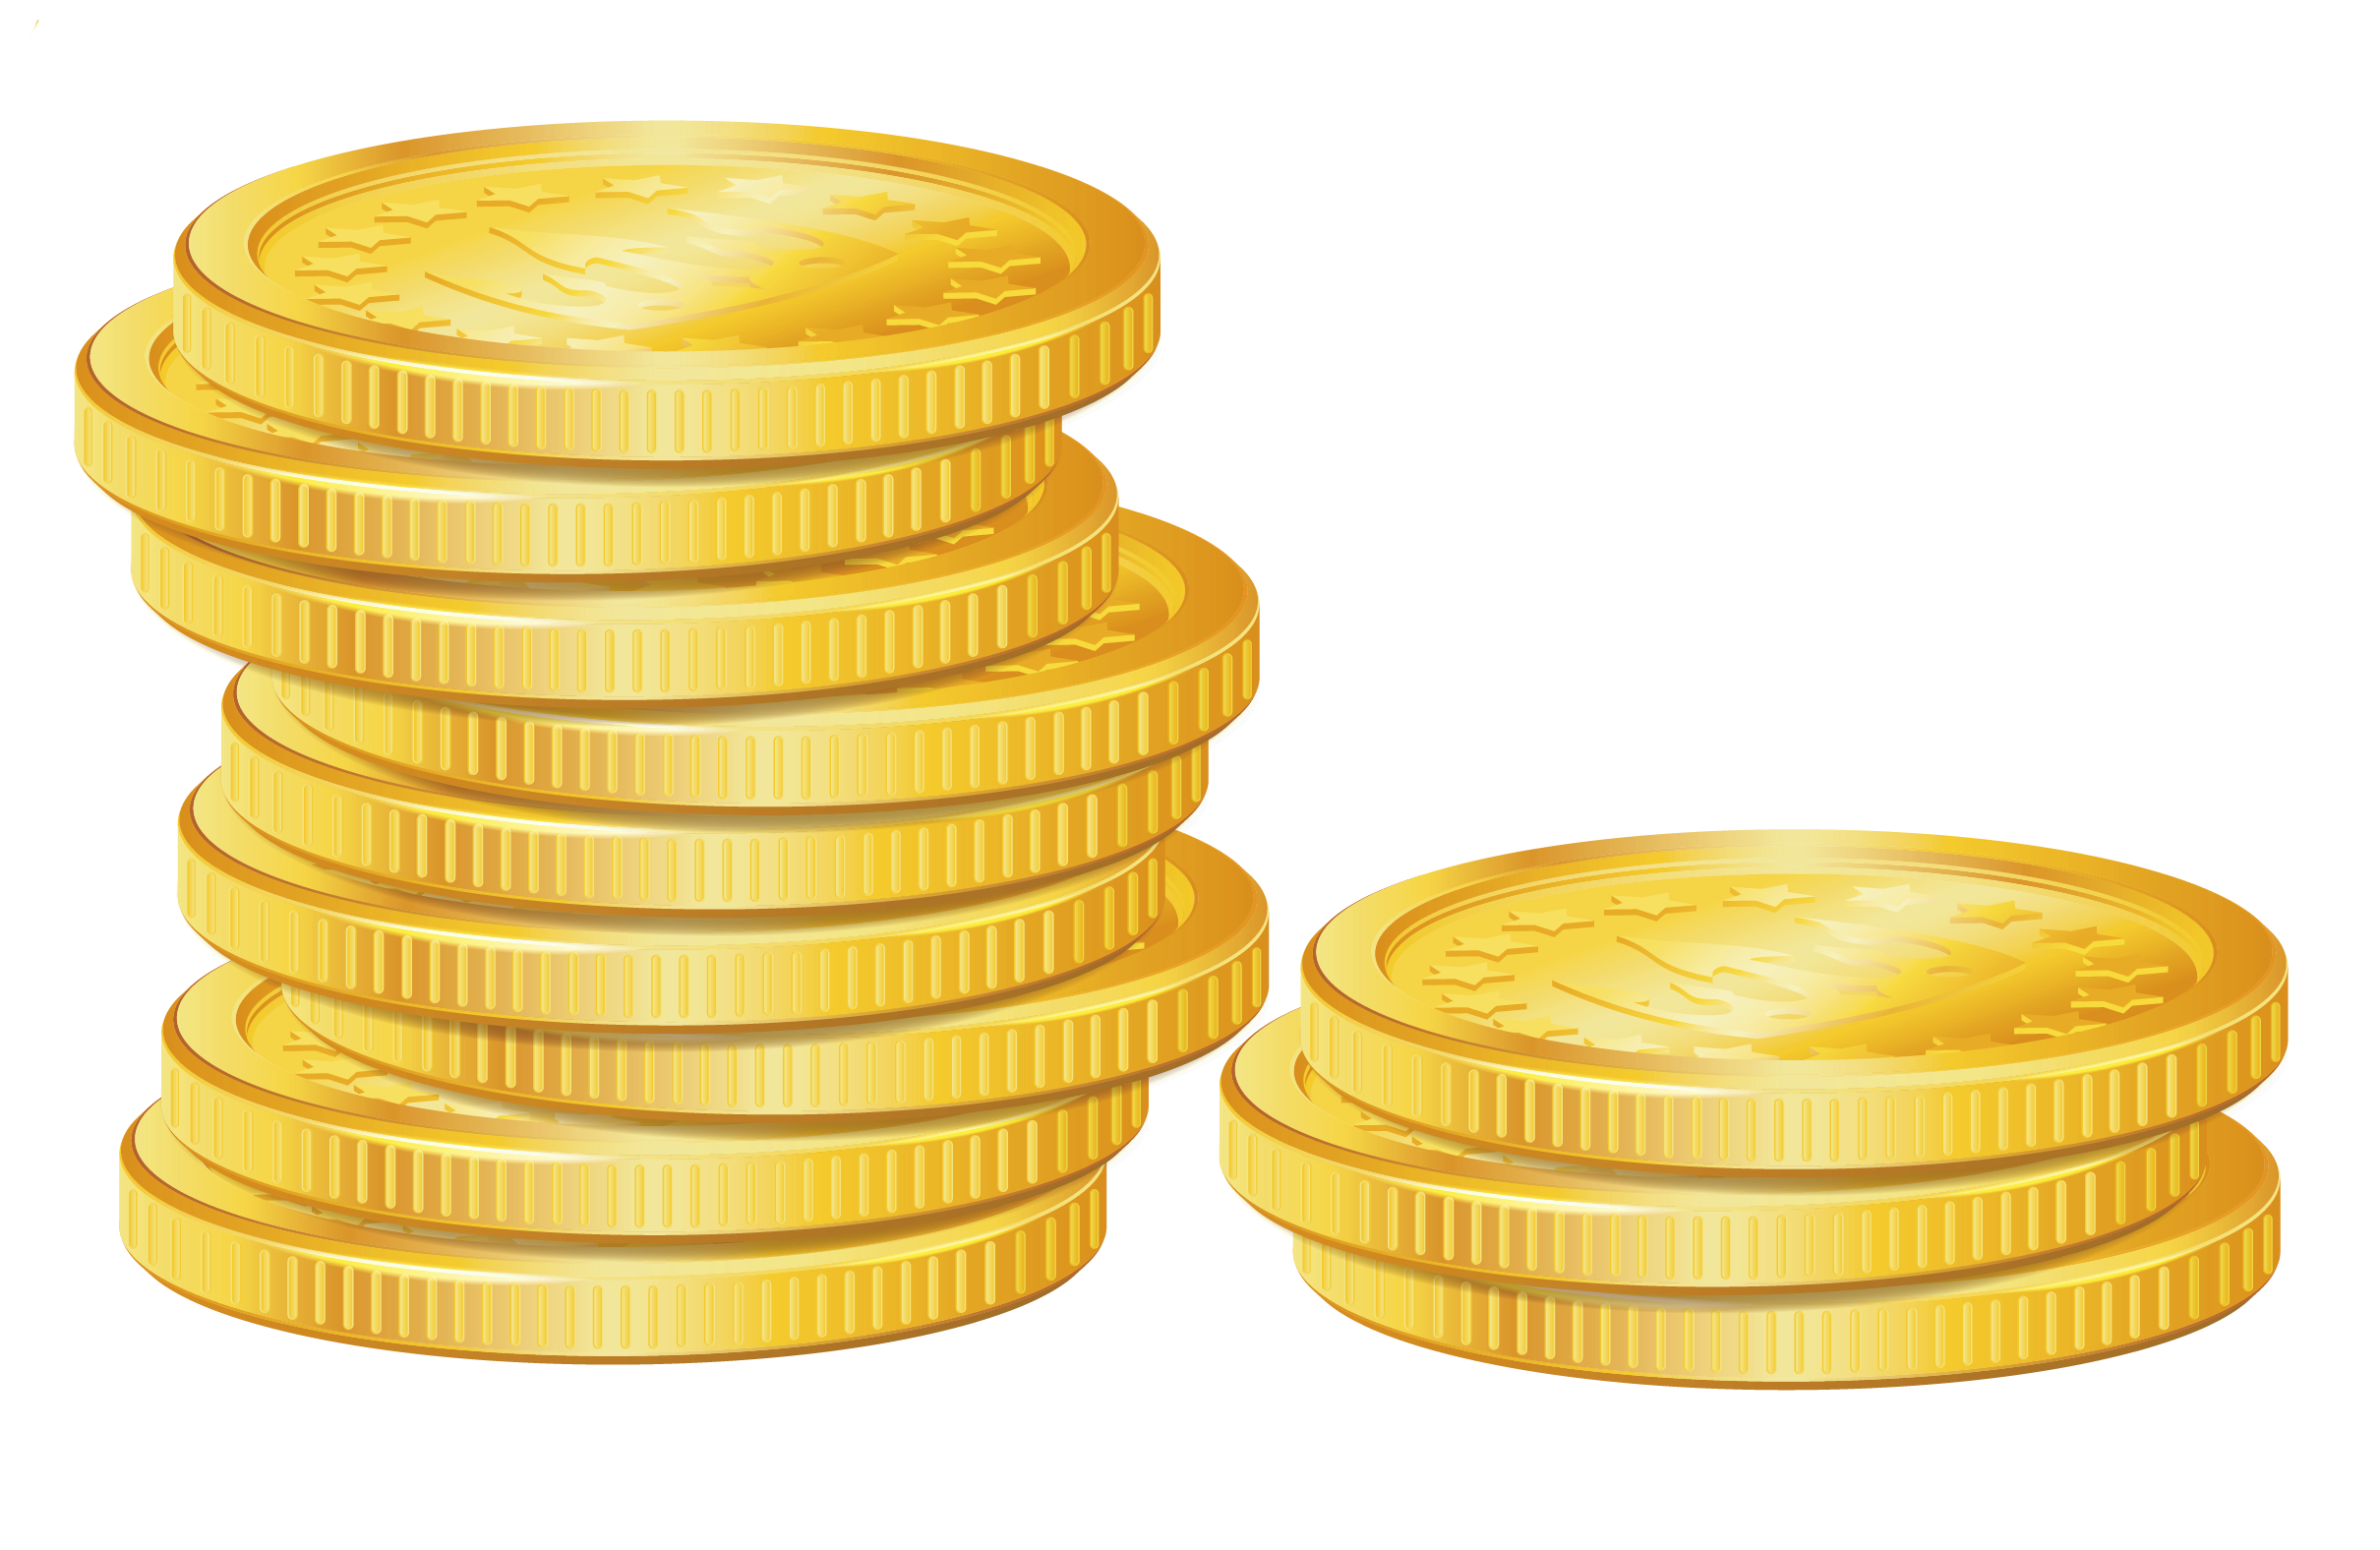 Coin 2 euro PNG image - Coin 